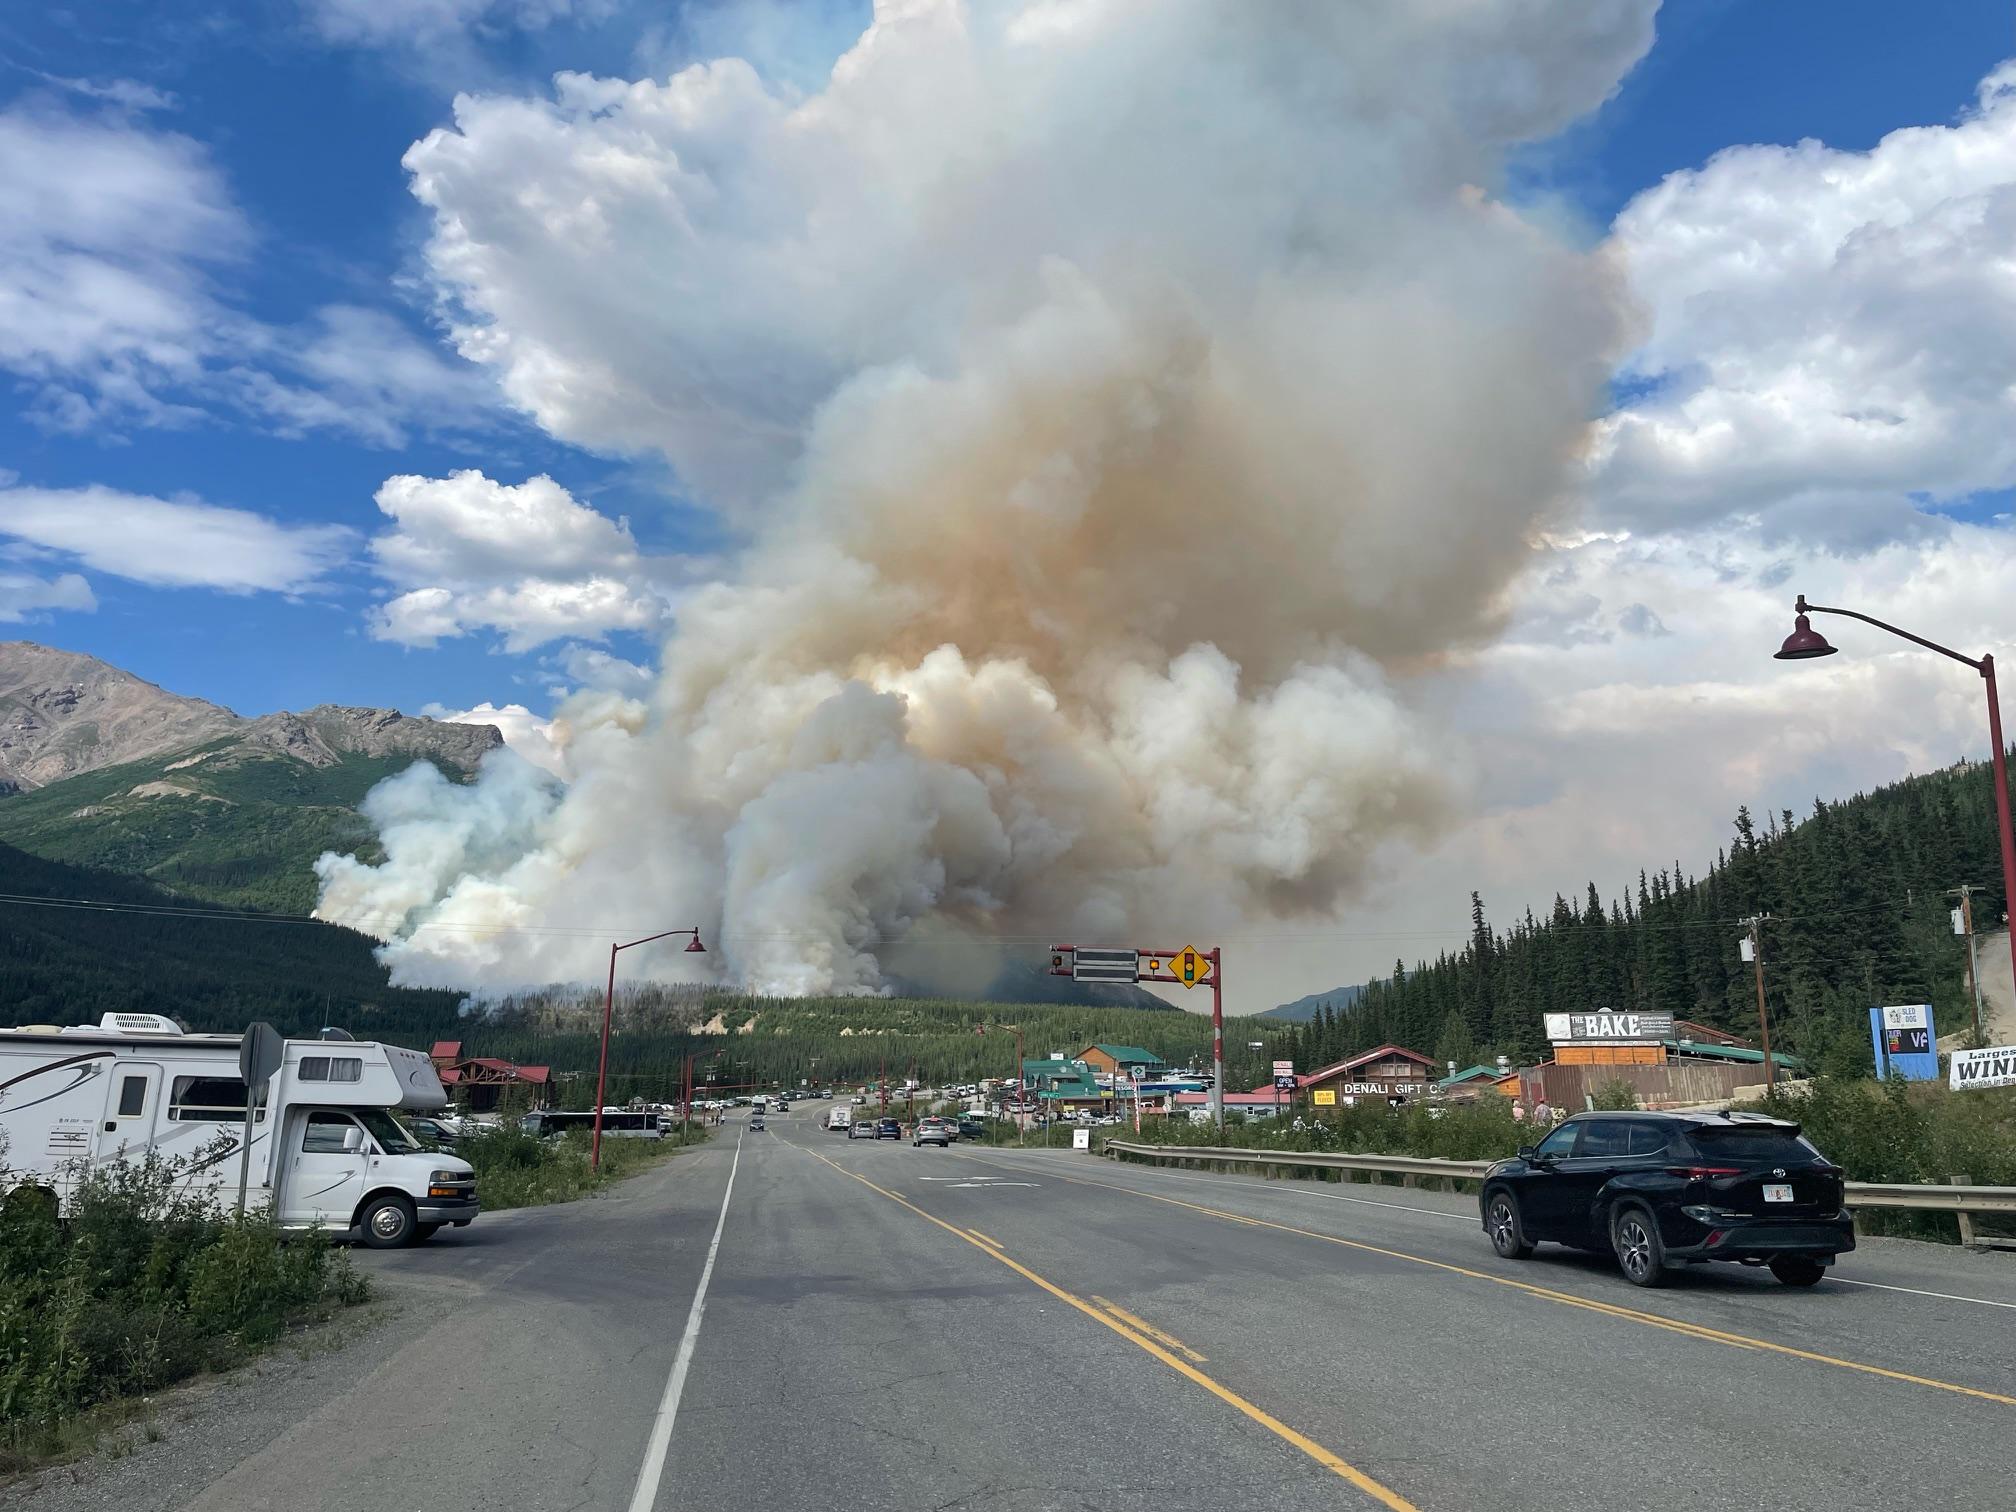 A large plume of smoke rises up the slopes of a mountain near a highway.